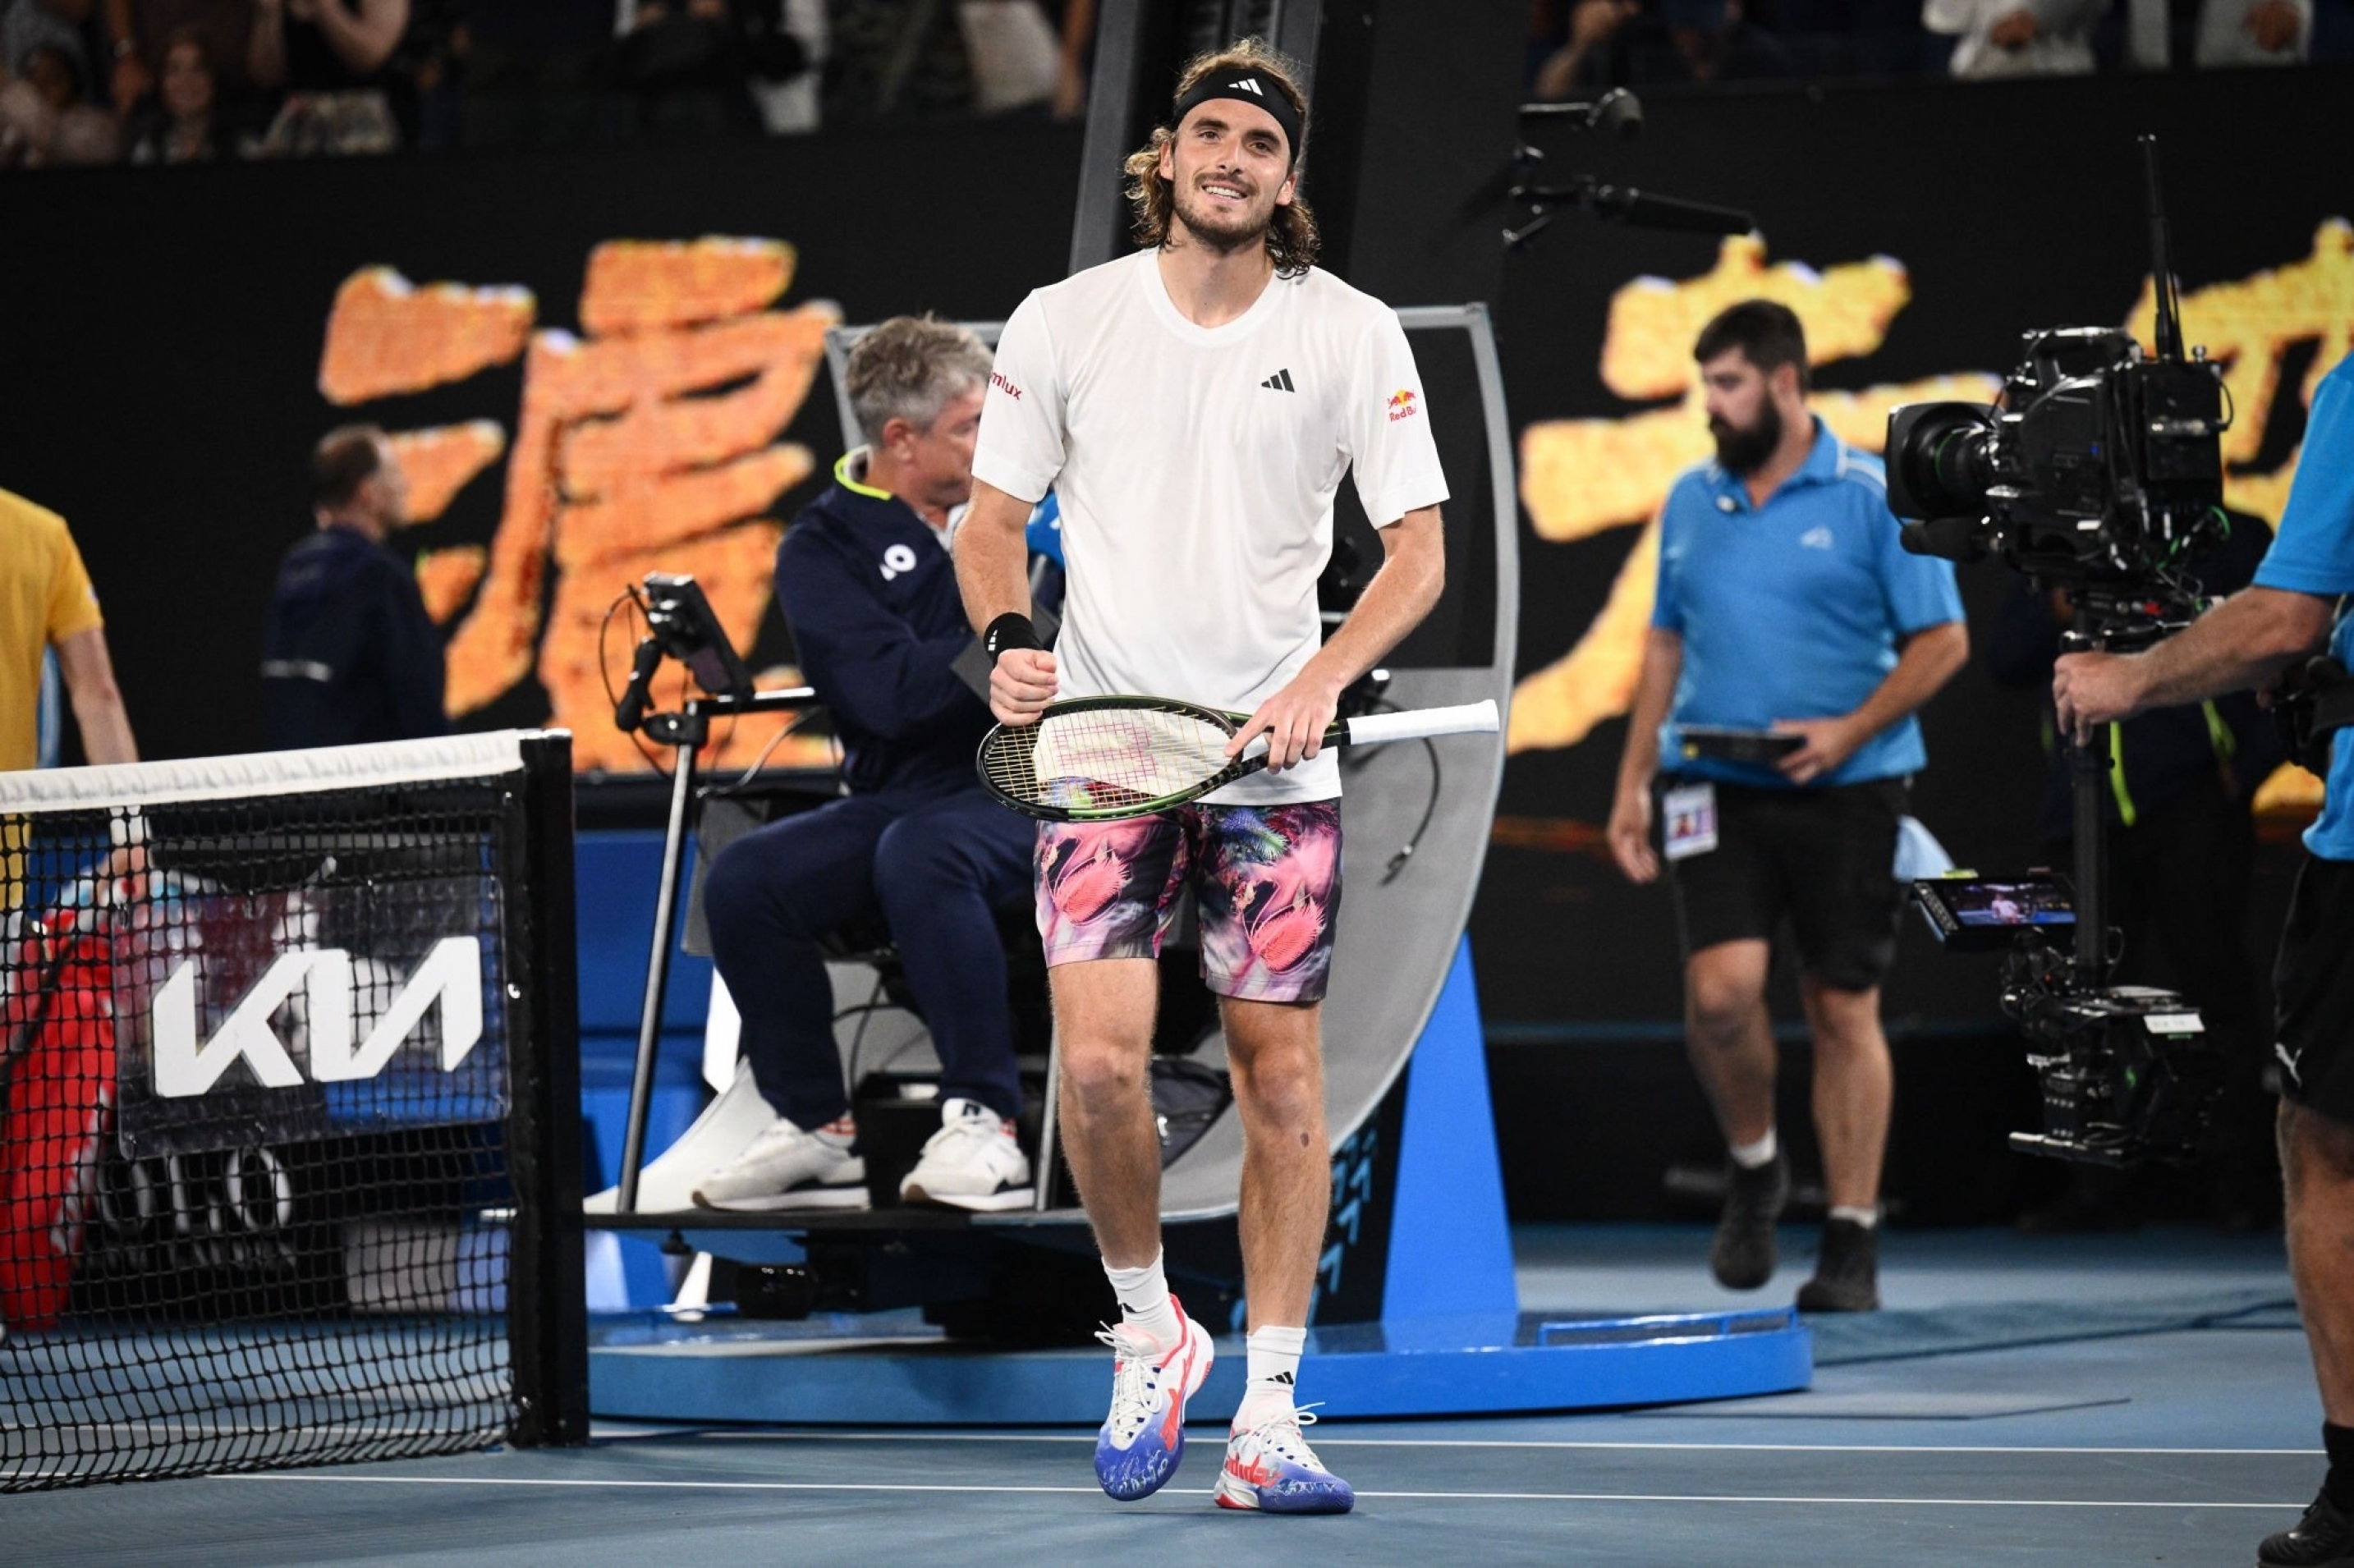 Australian Open 2023: Stefanos Tsitsipas sends cheeky invite to Australian actress Margot Robbie after quarter-final win, says 'It would be nice to see her here' - Check out